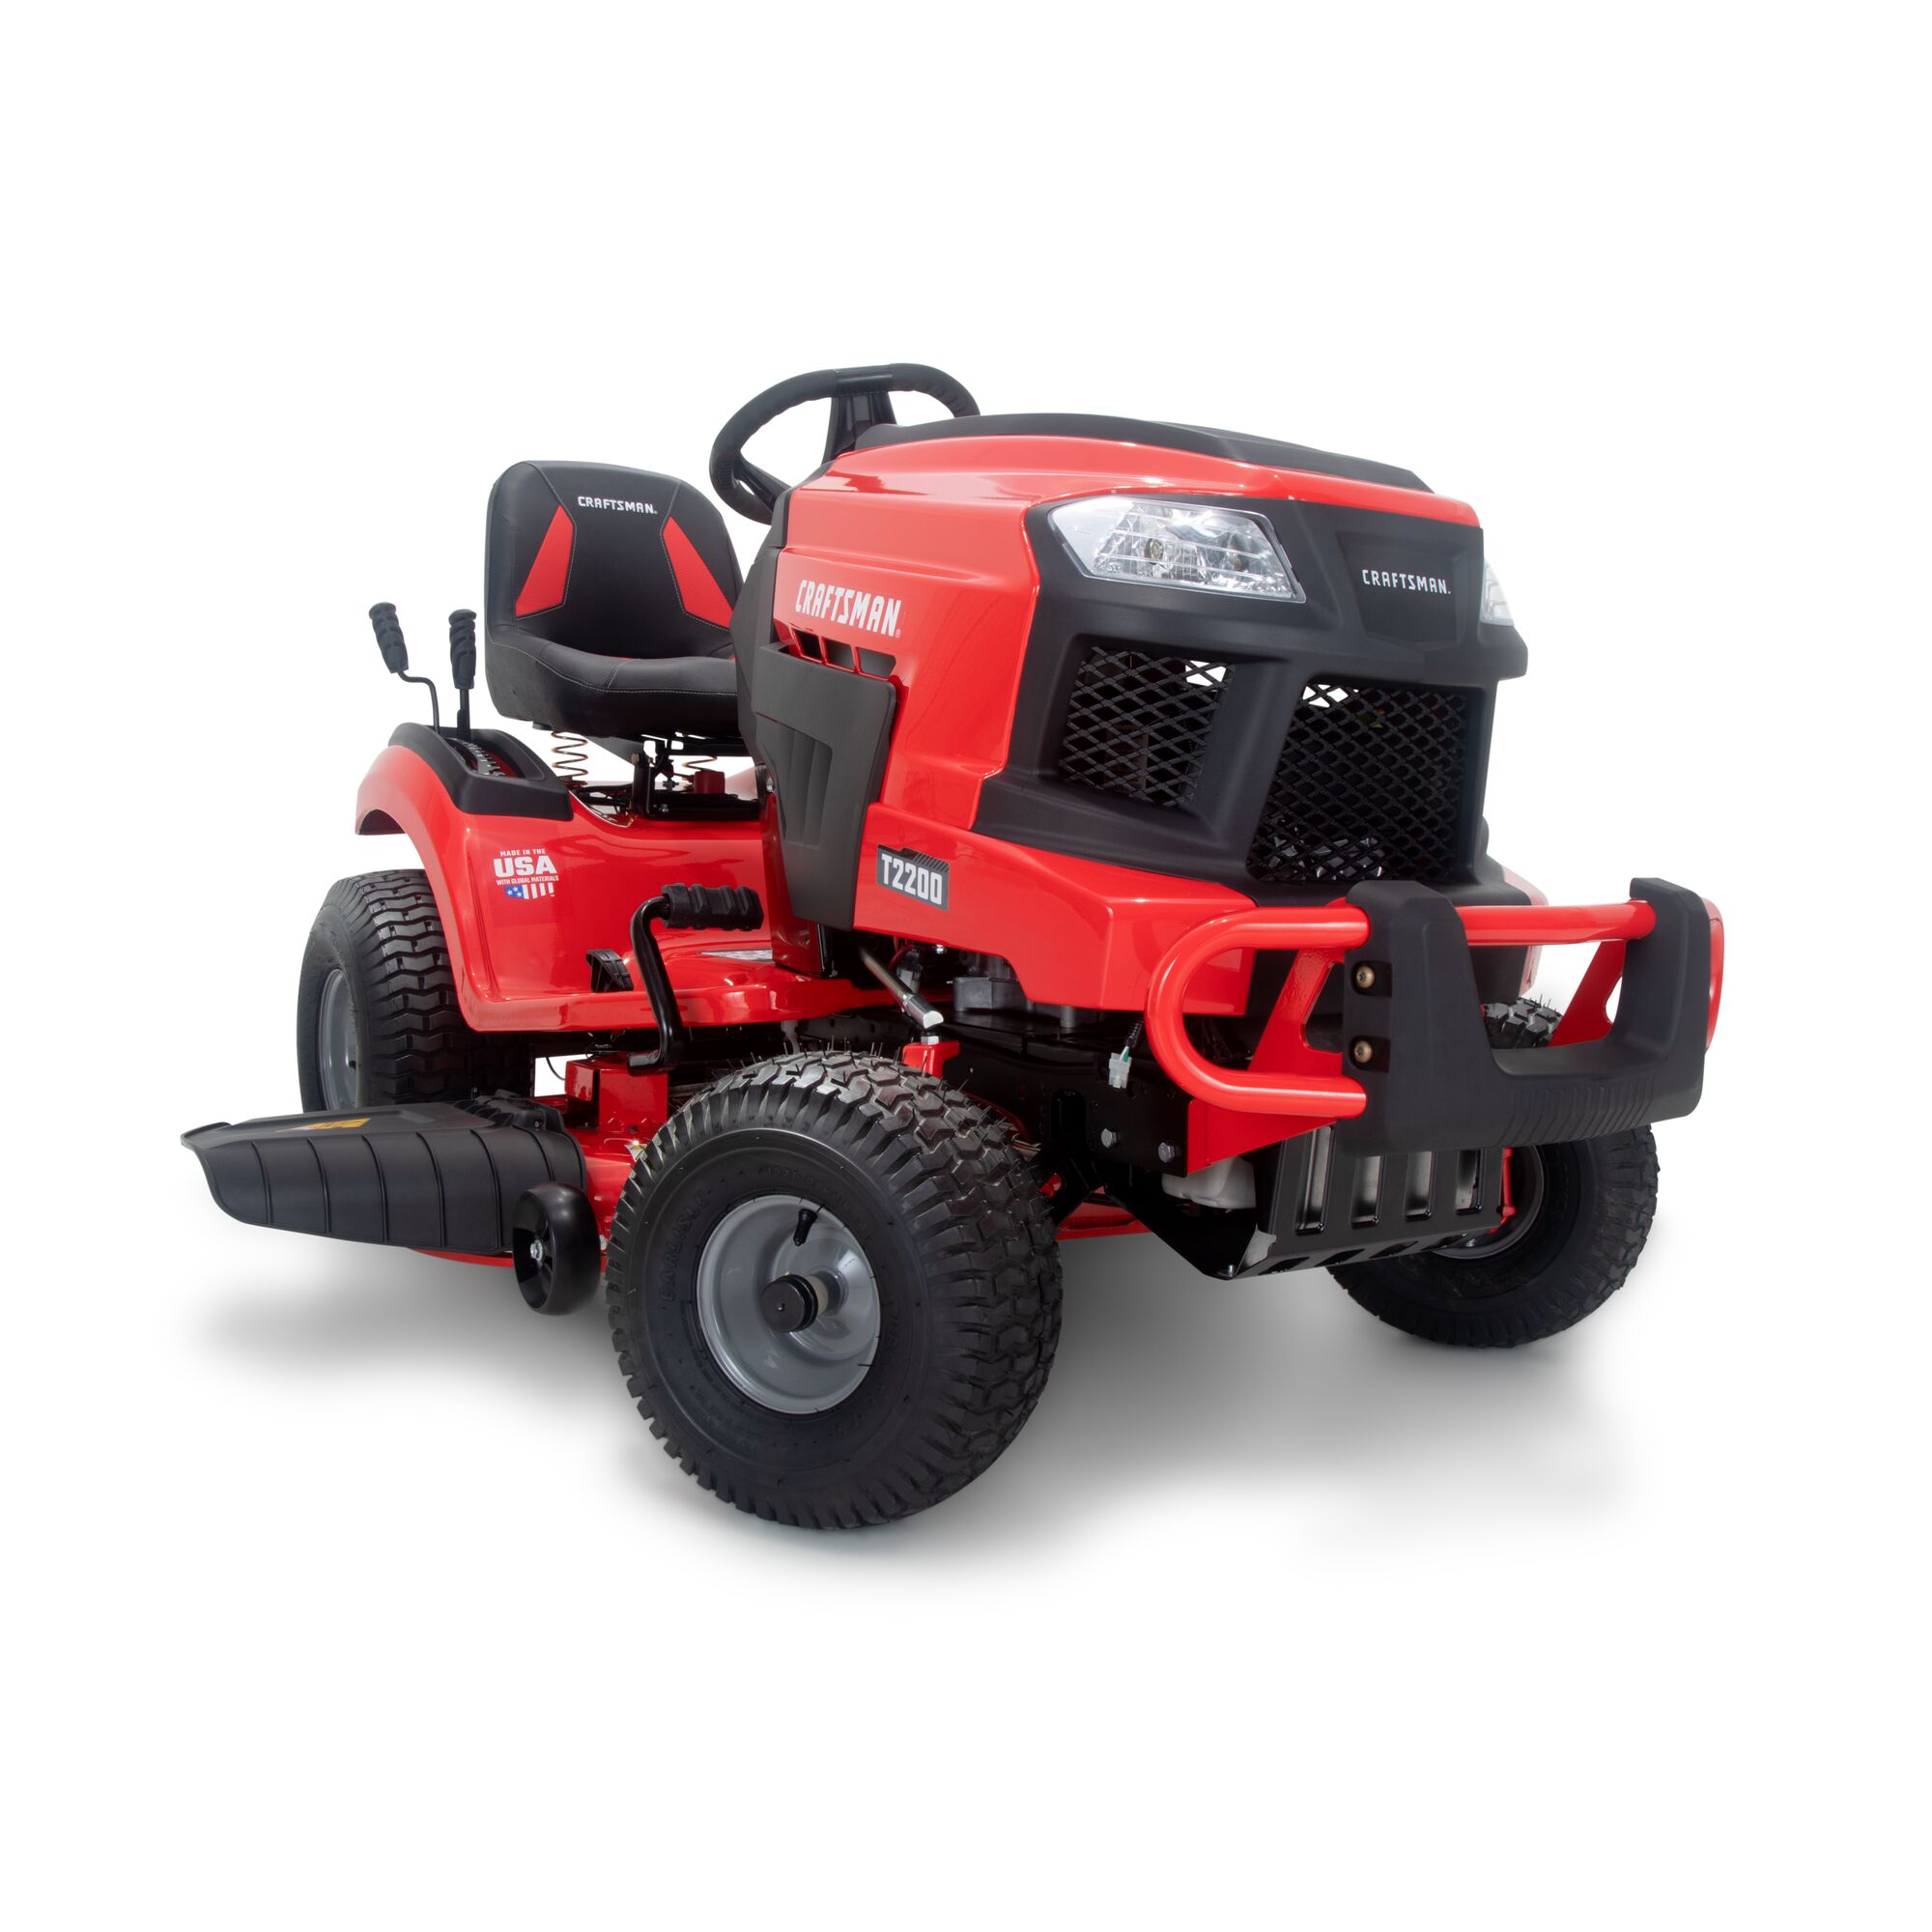 View of CRAFTSMAN Riding Mowers on white background